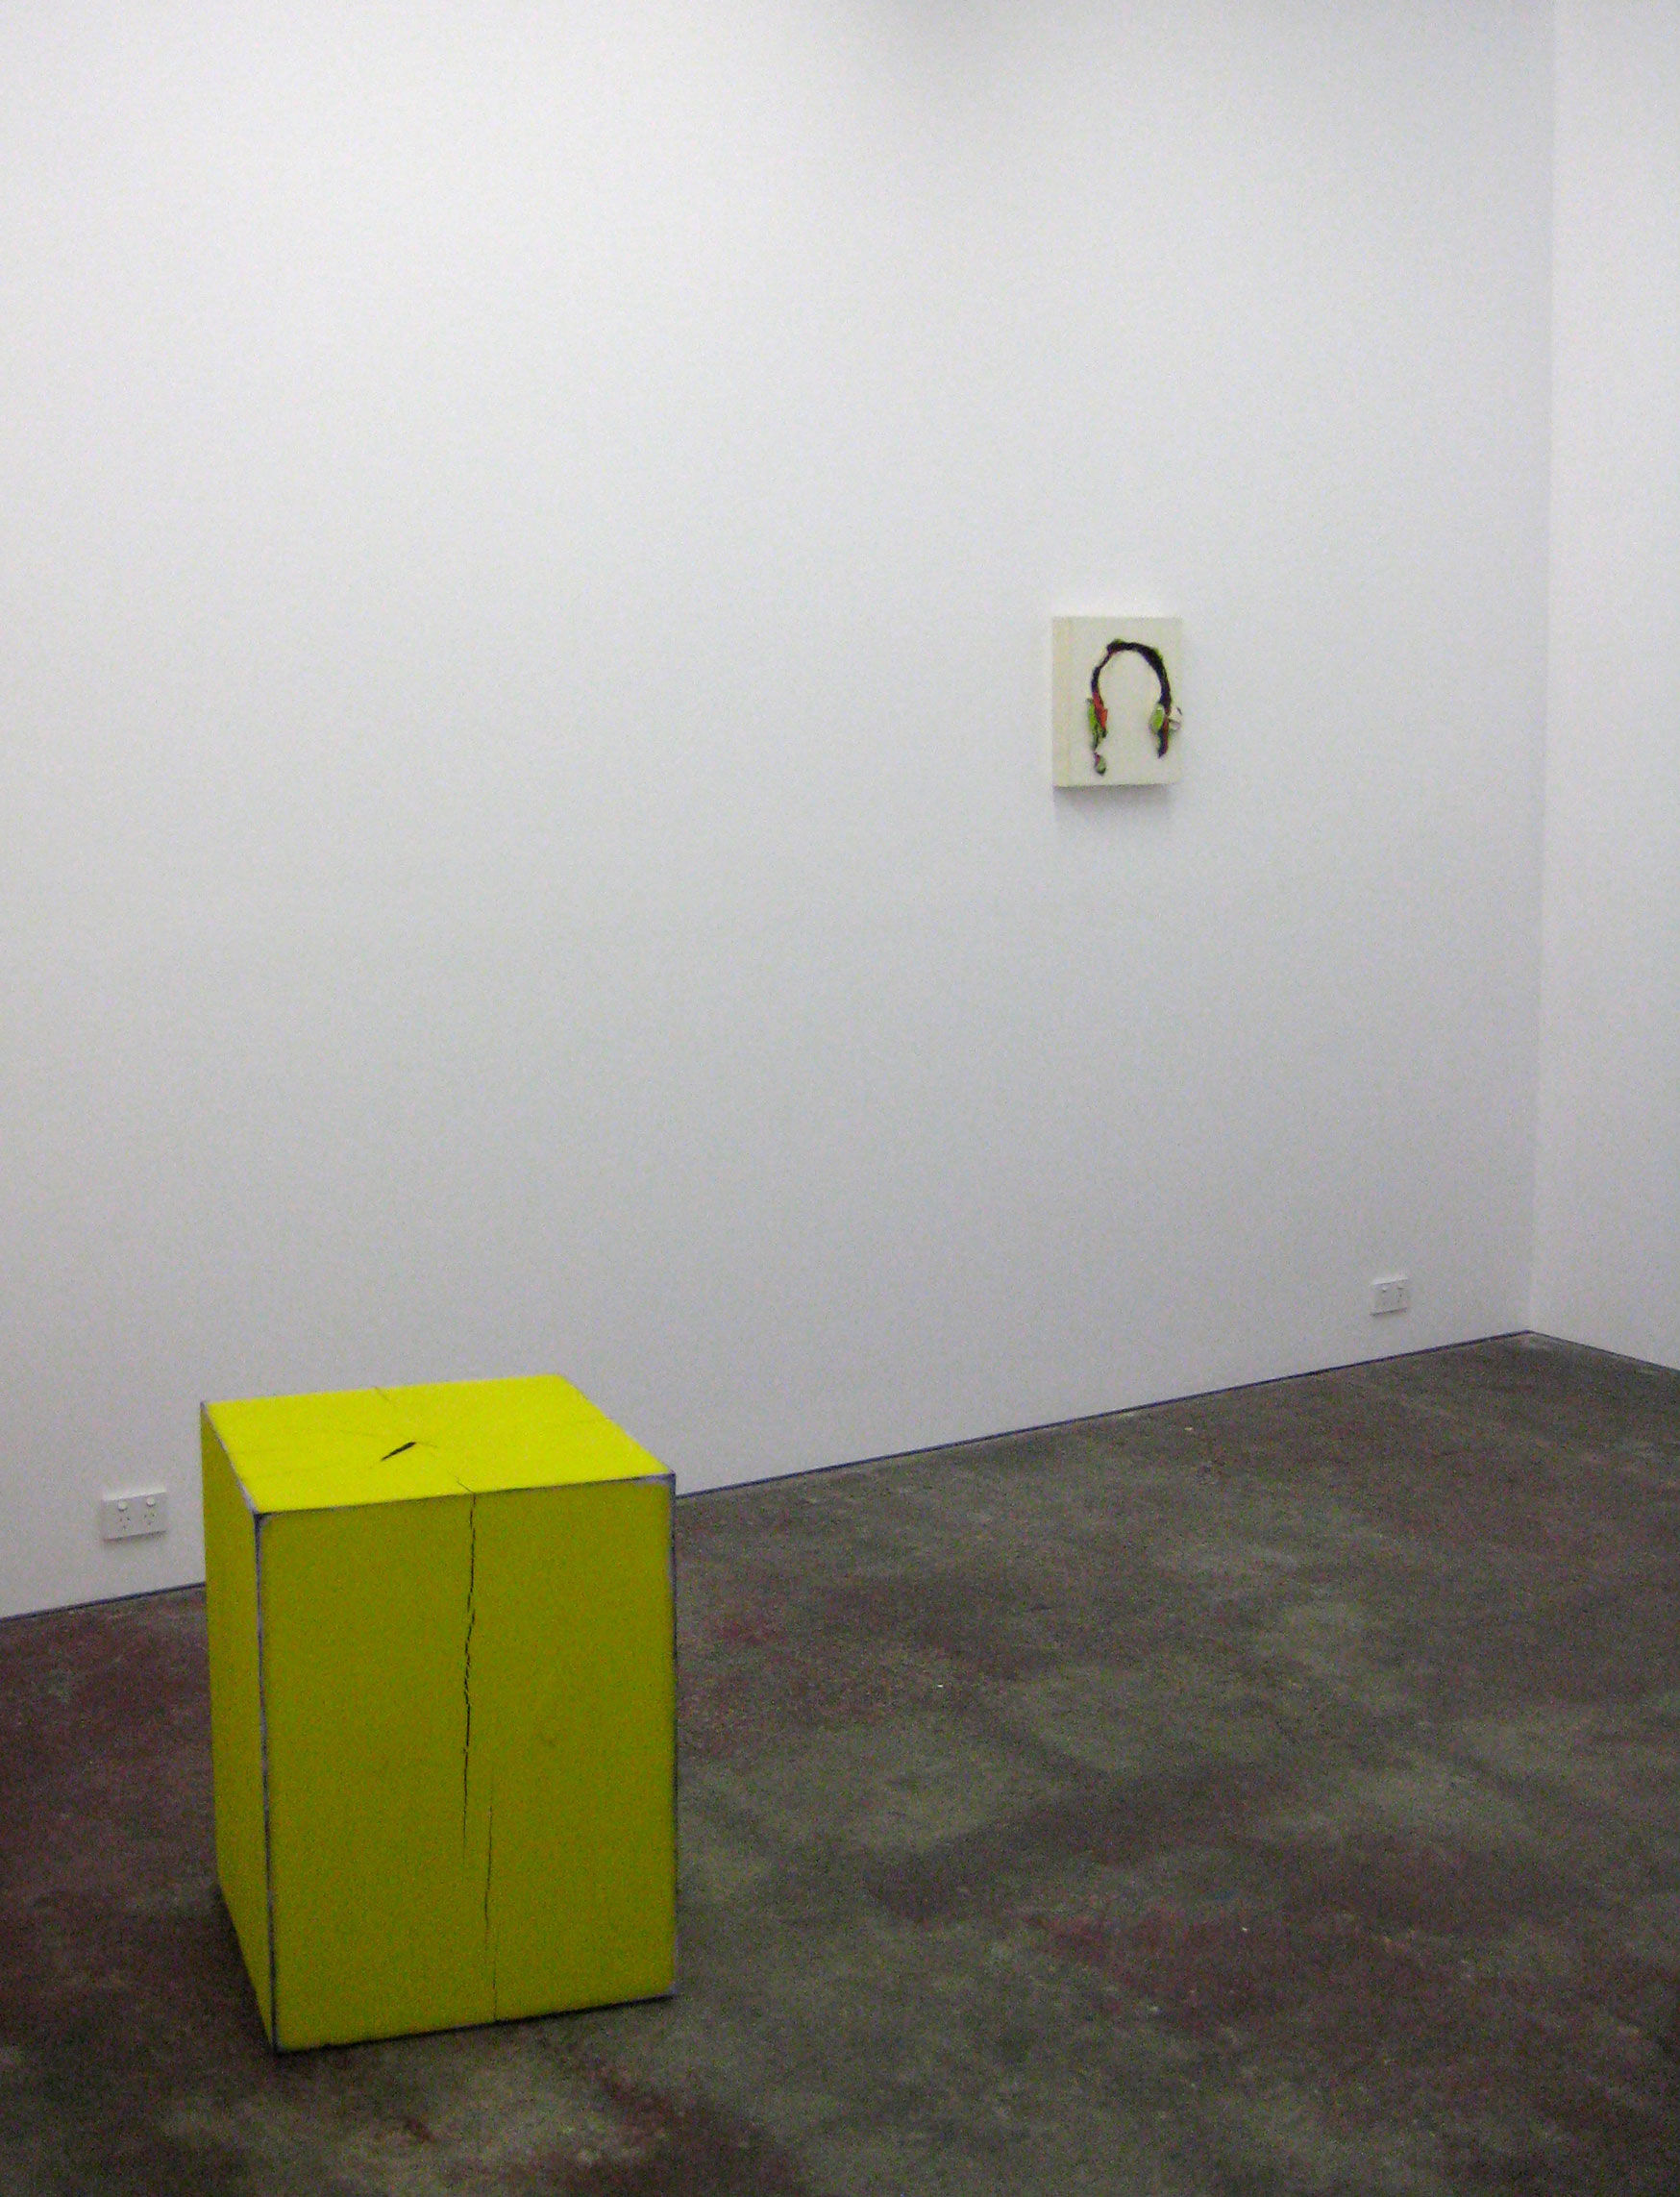 A Loose Harness For Time, 2012